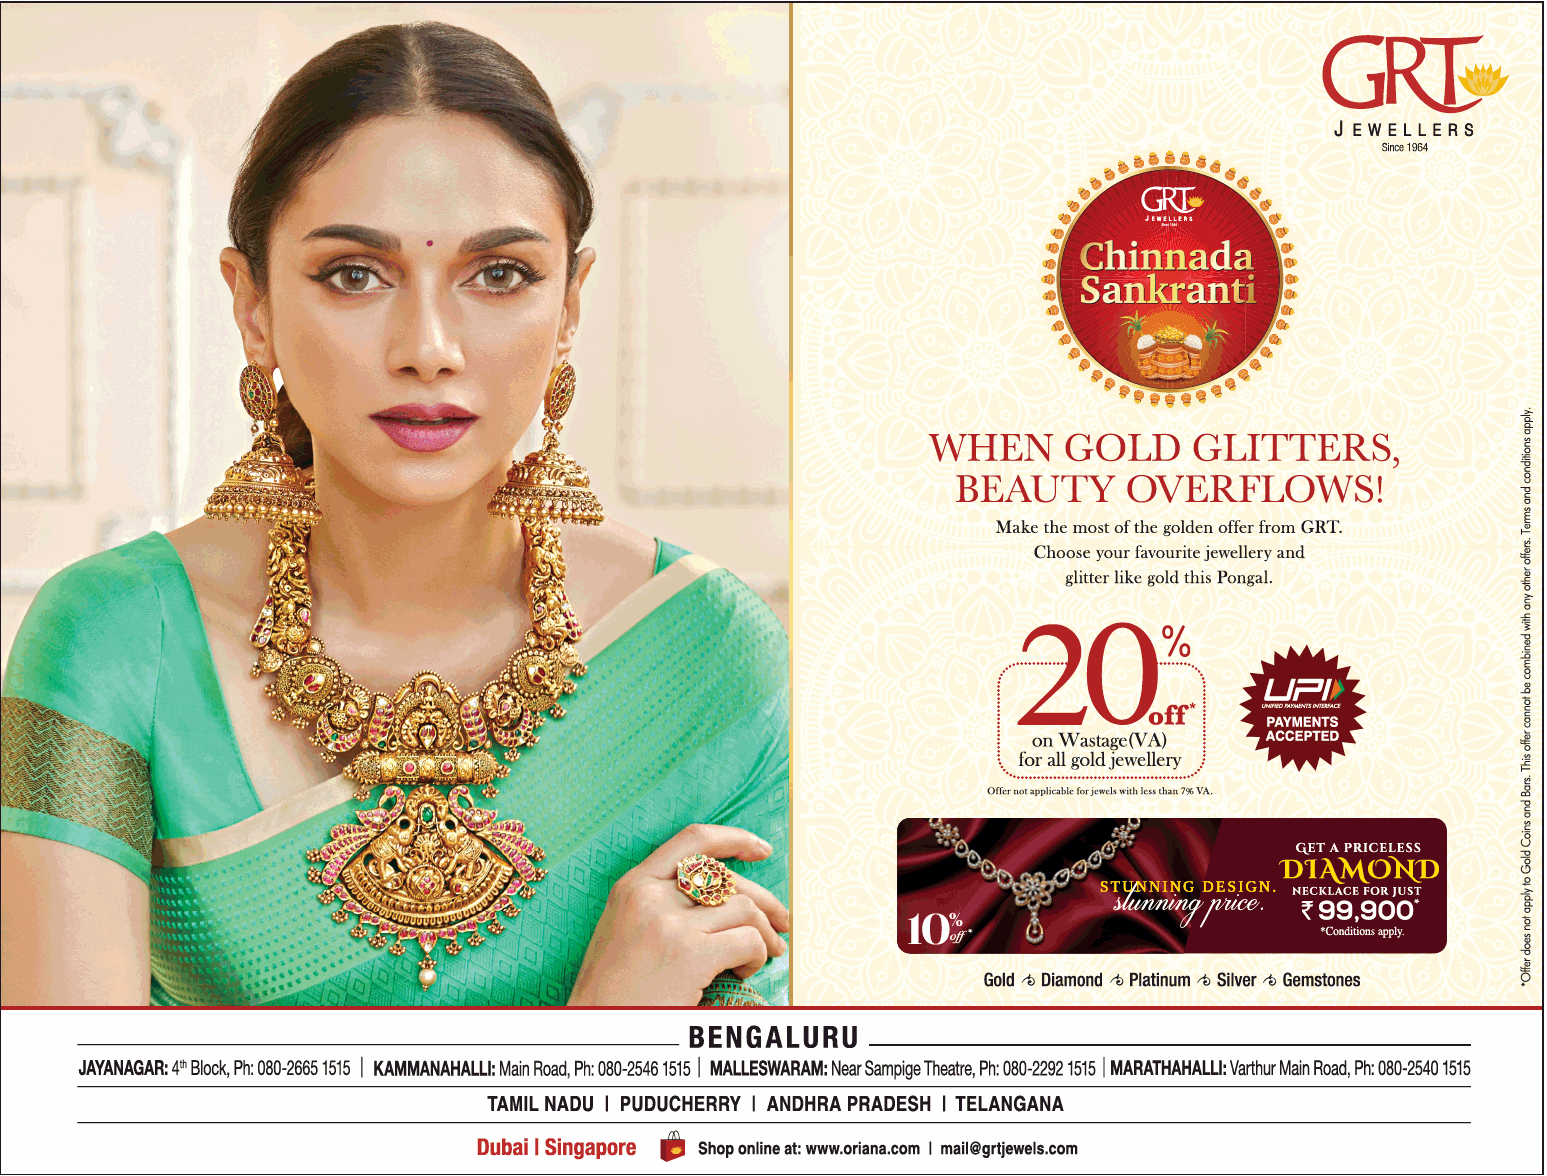 grt-jewellers-chinnada-sankranthi-when-gold-glitters-ebauty-overflows-ad-times-of-india-bangalore-03-01-2019.png